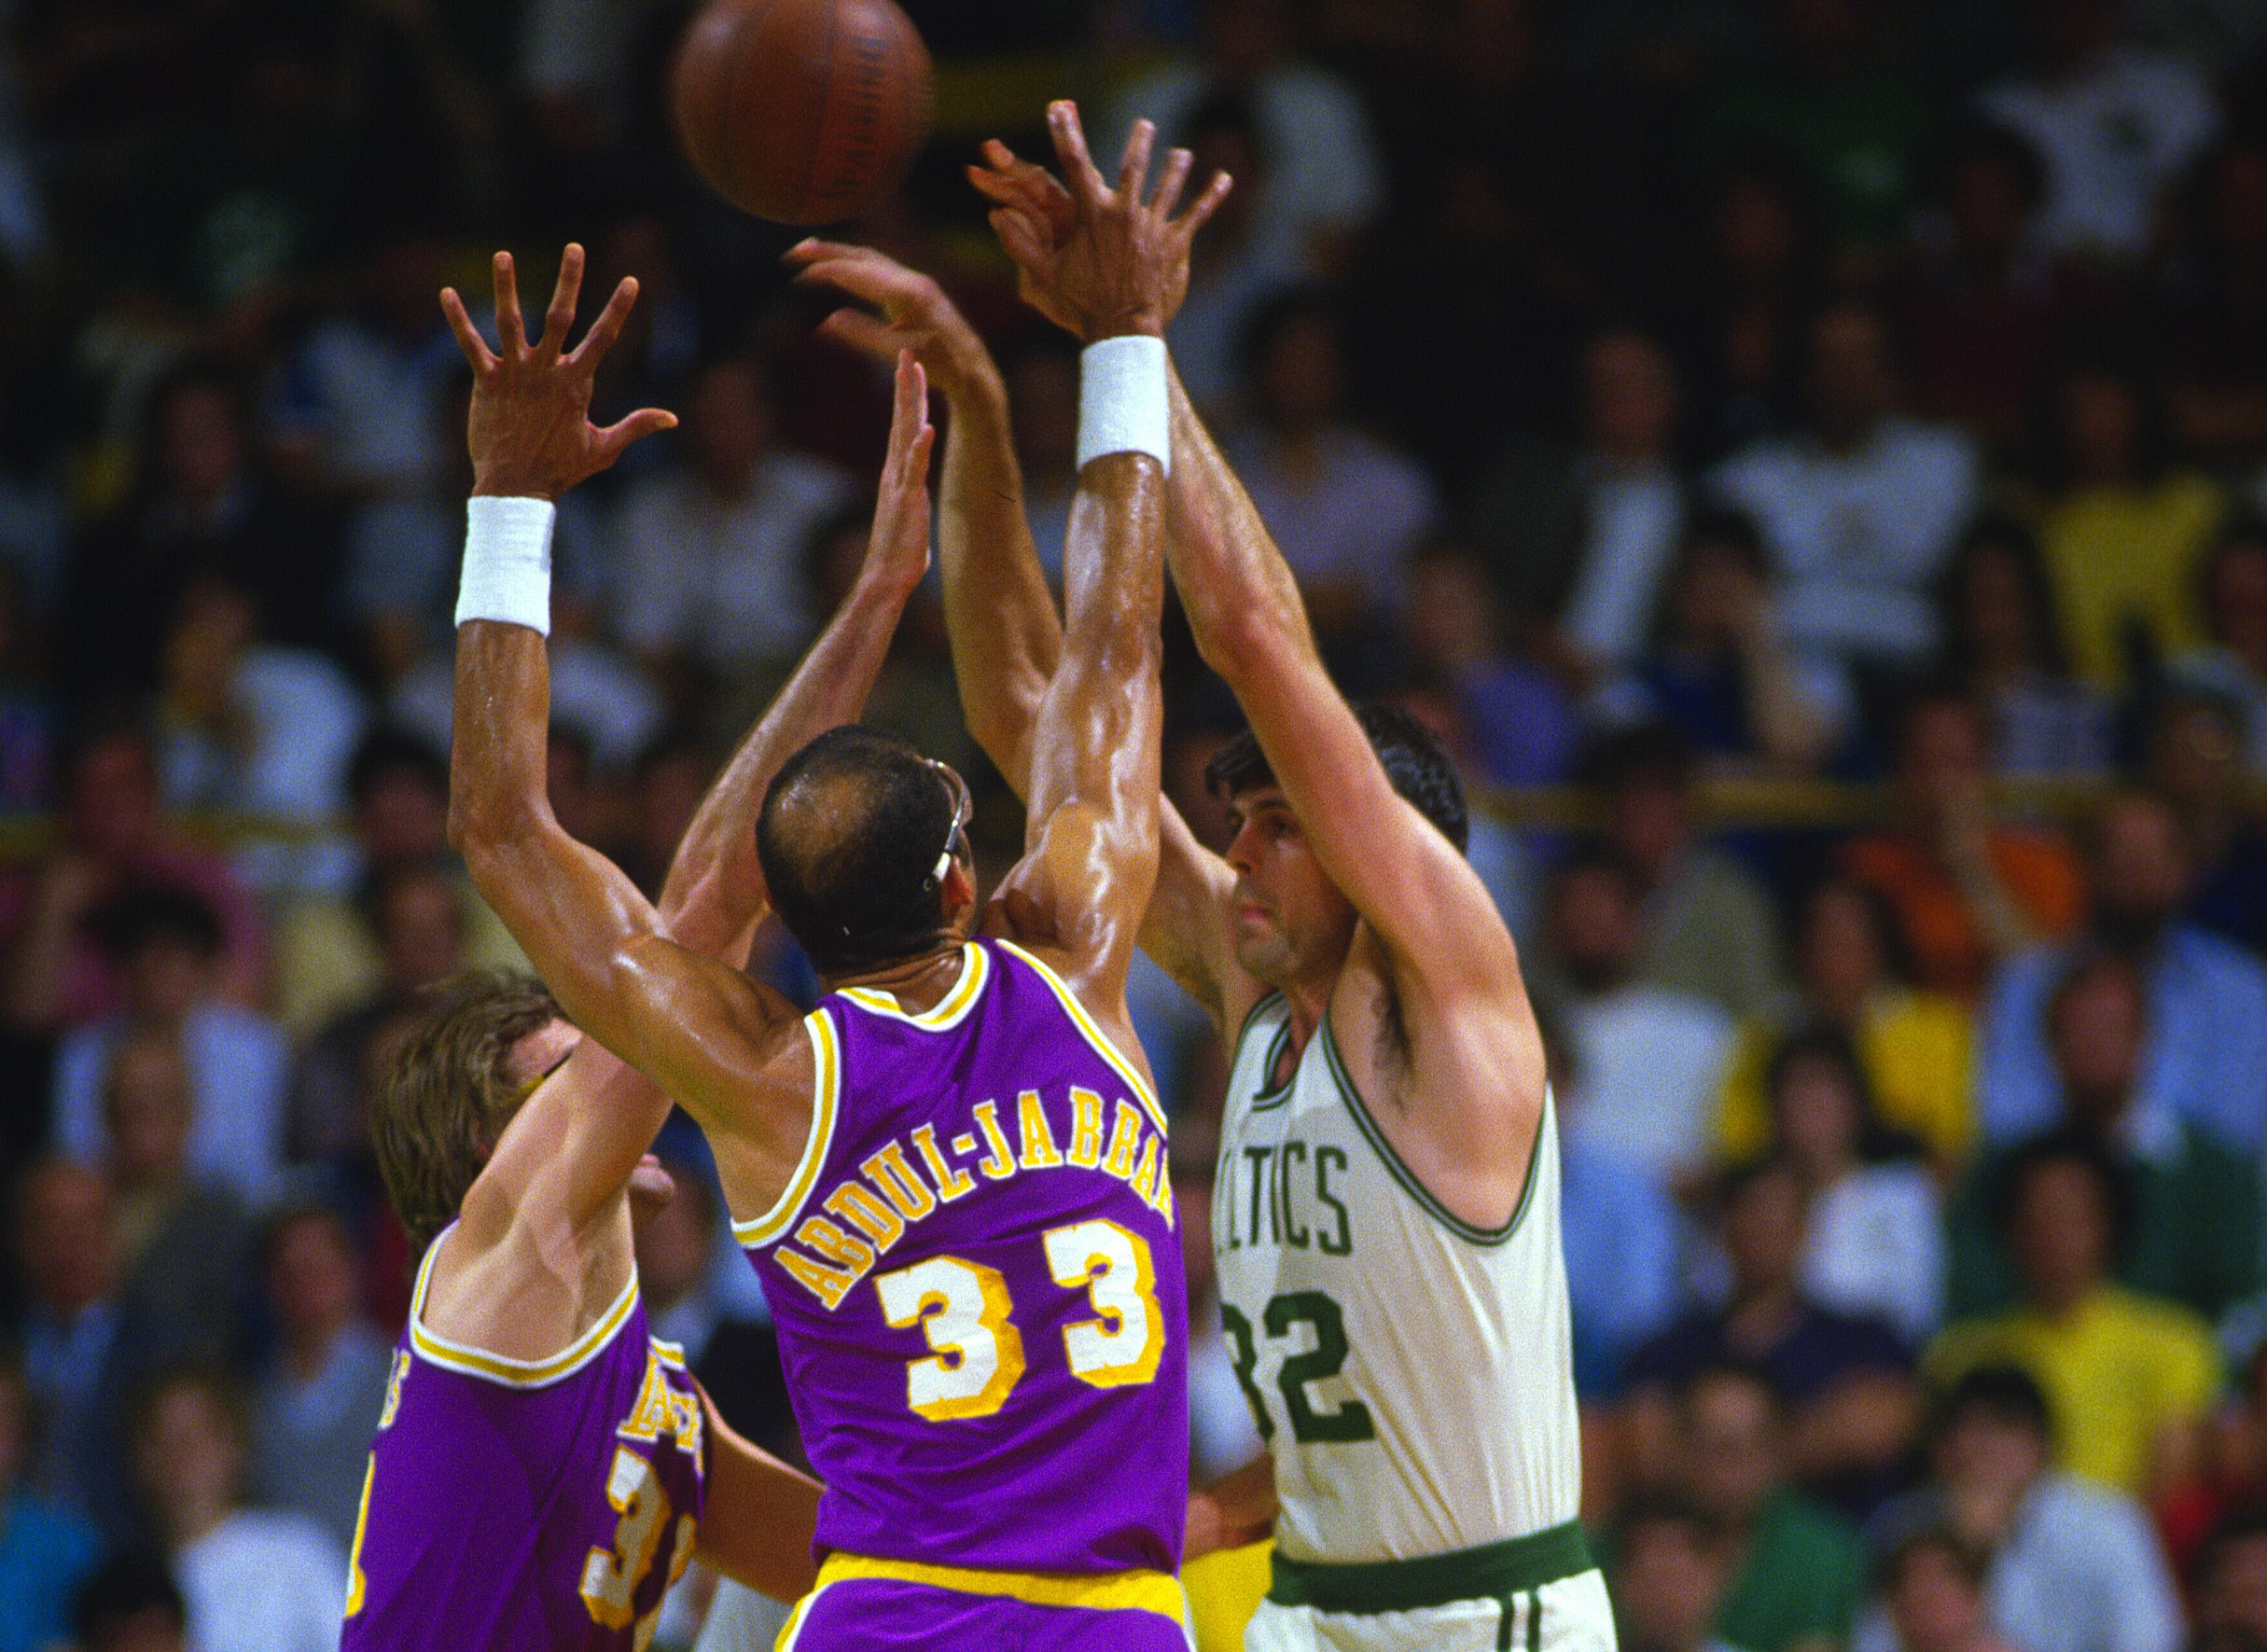 Who Was Better: The 1986 Boston Celtics or the 1987 Los Angeles Lakers?